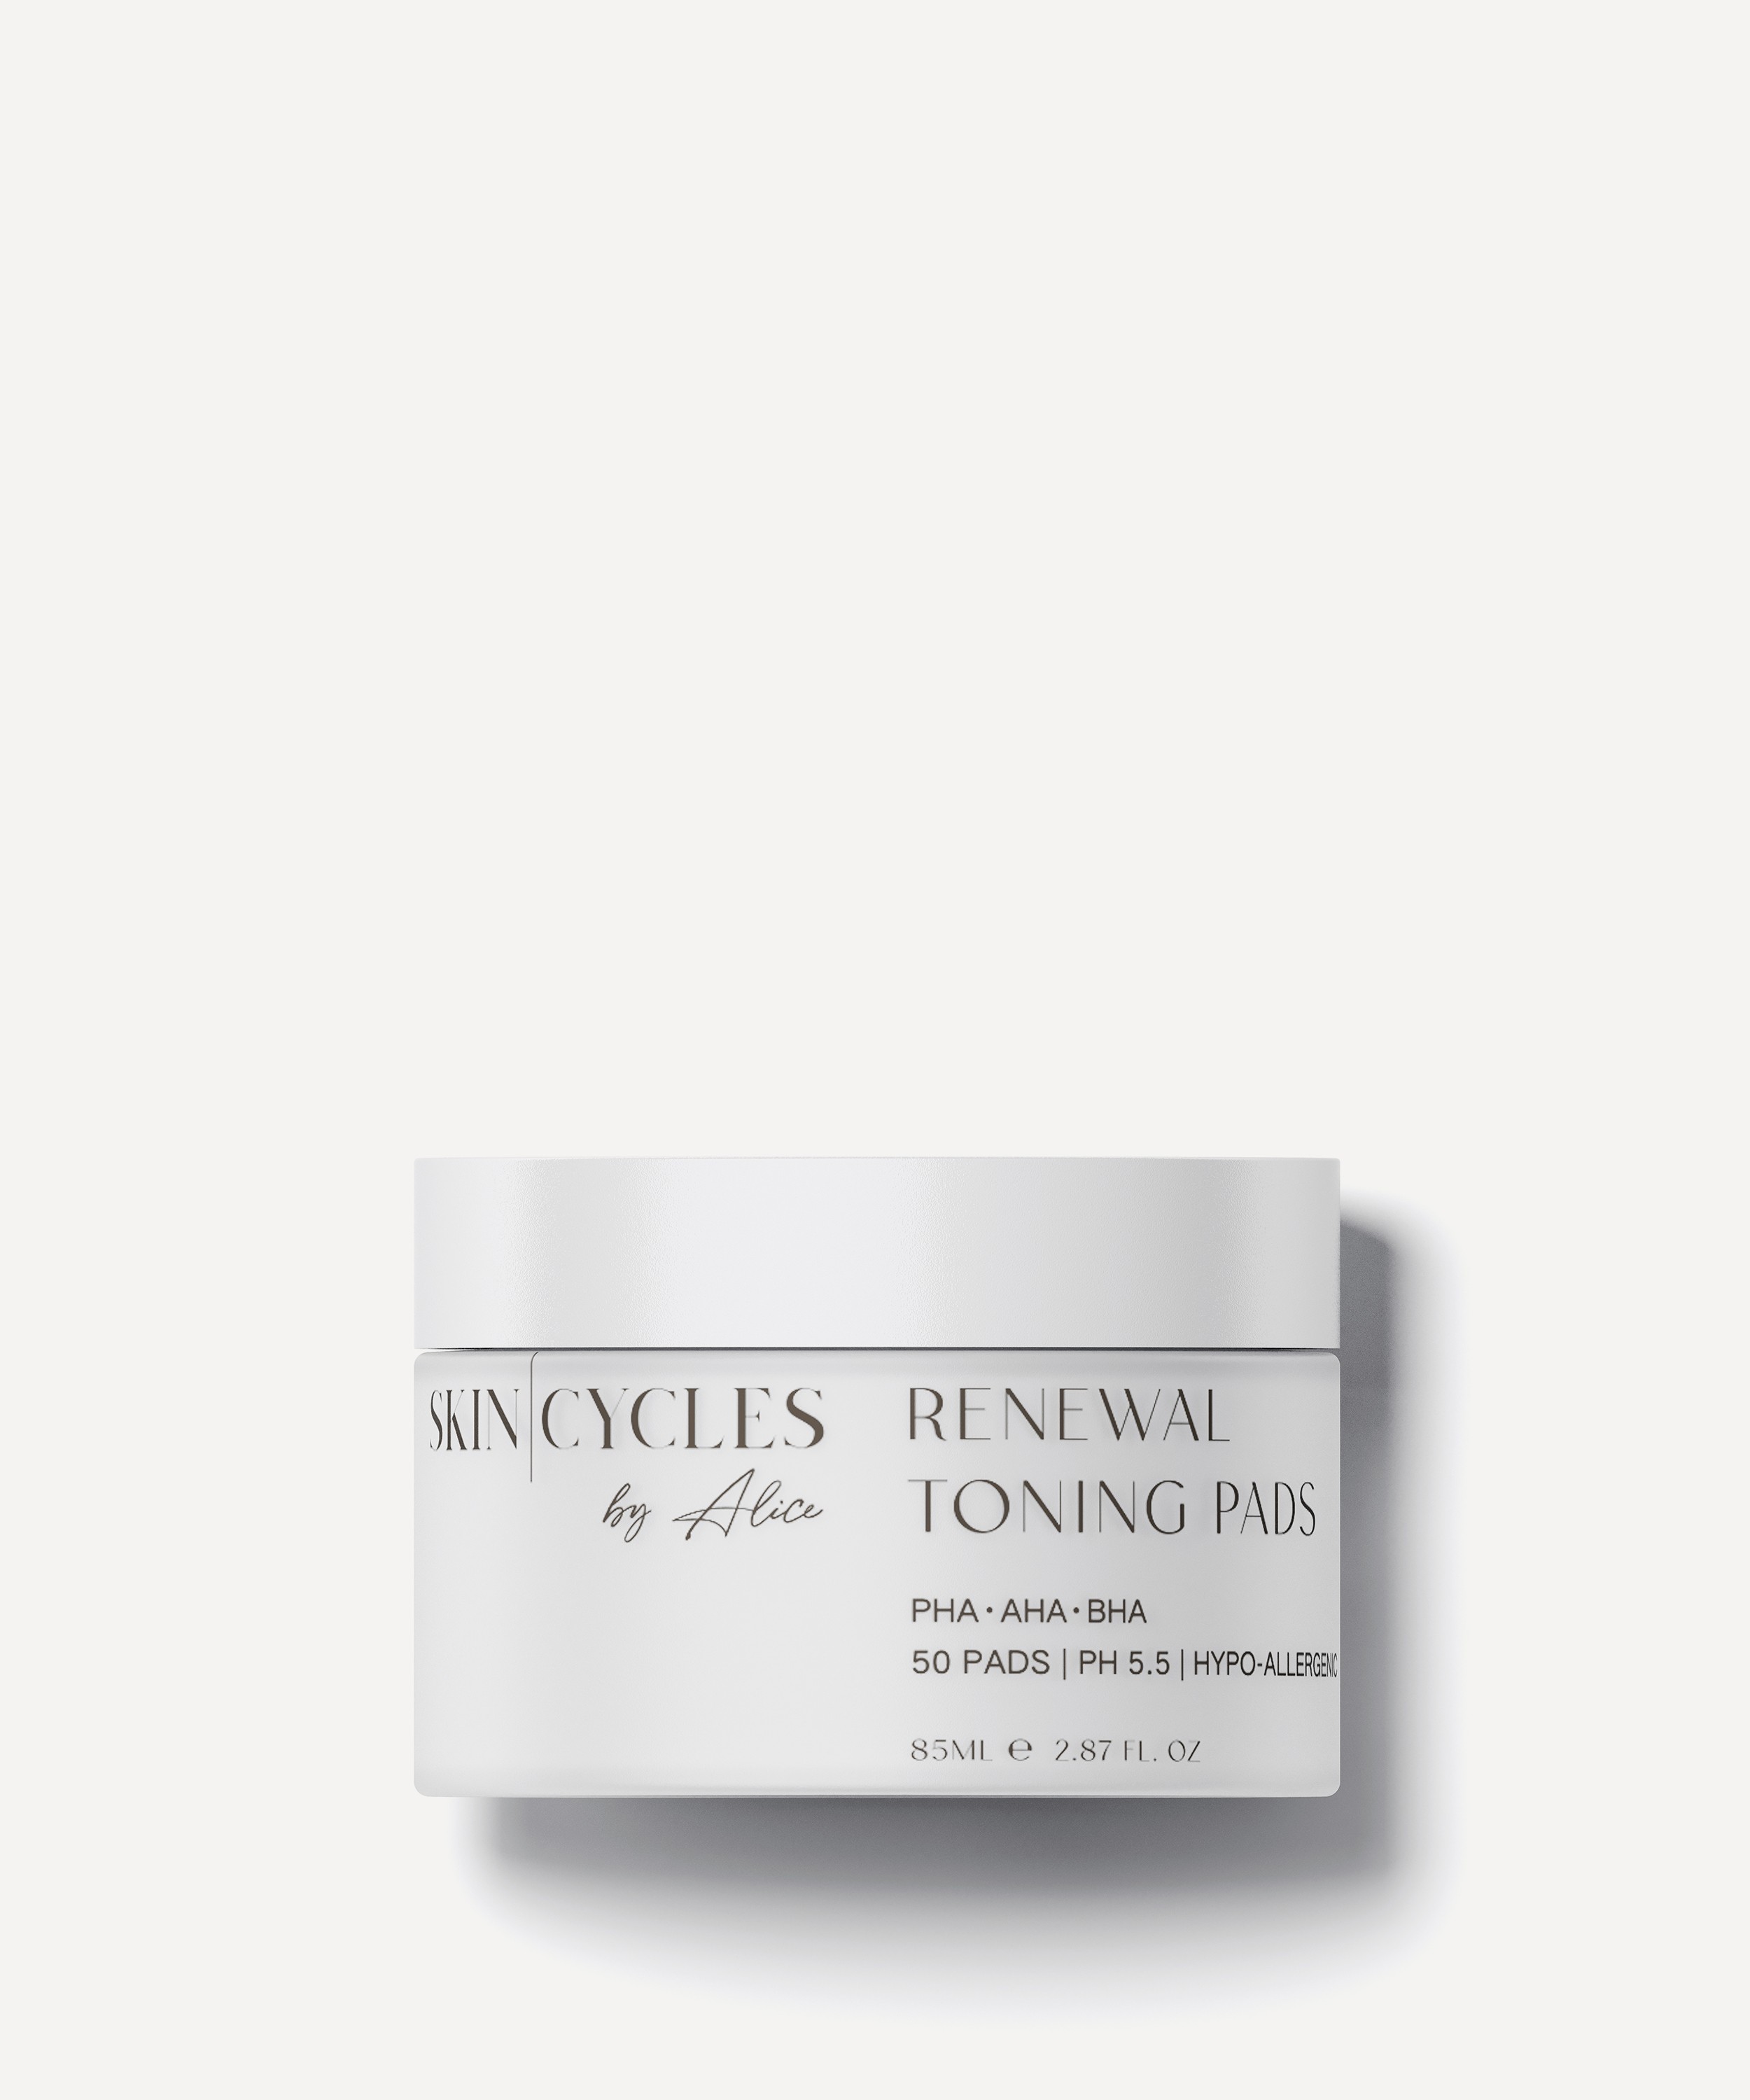 Skincycles - Renewal Toning Pads Pack of 50 image number 0